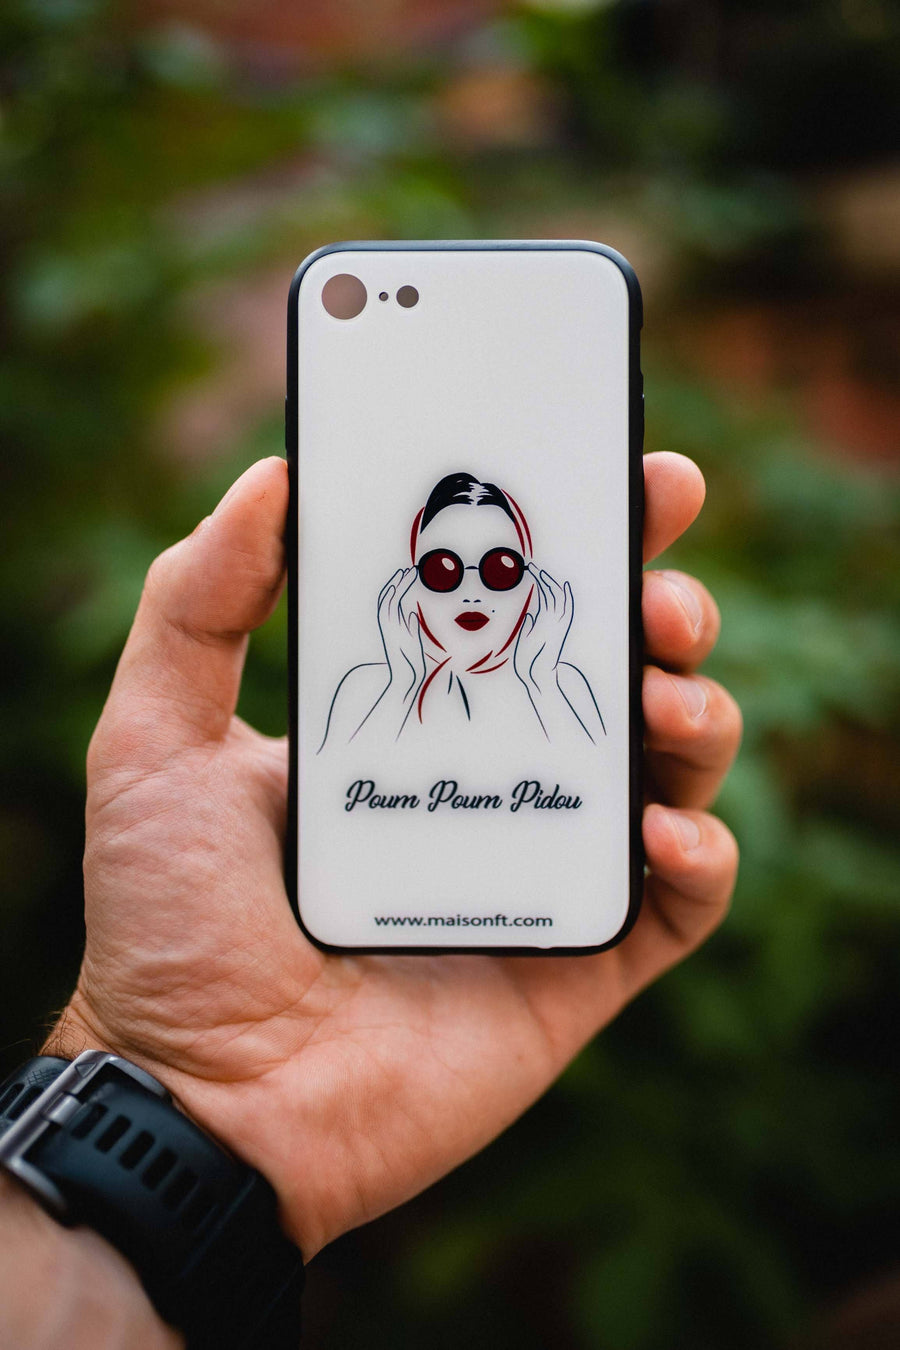 Coque Iphone Marylin - Made in France Coque d'Iphone - Maison FT made in France ou Bio